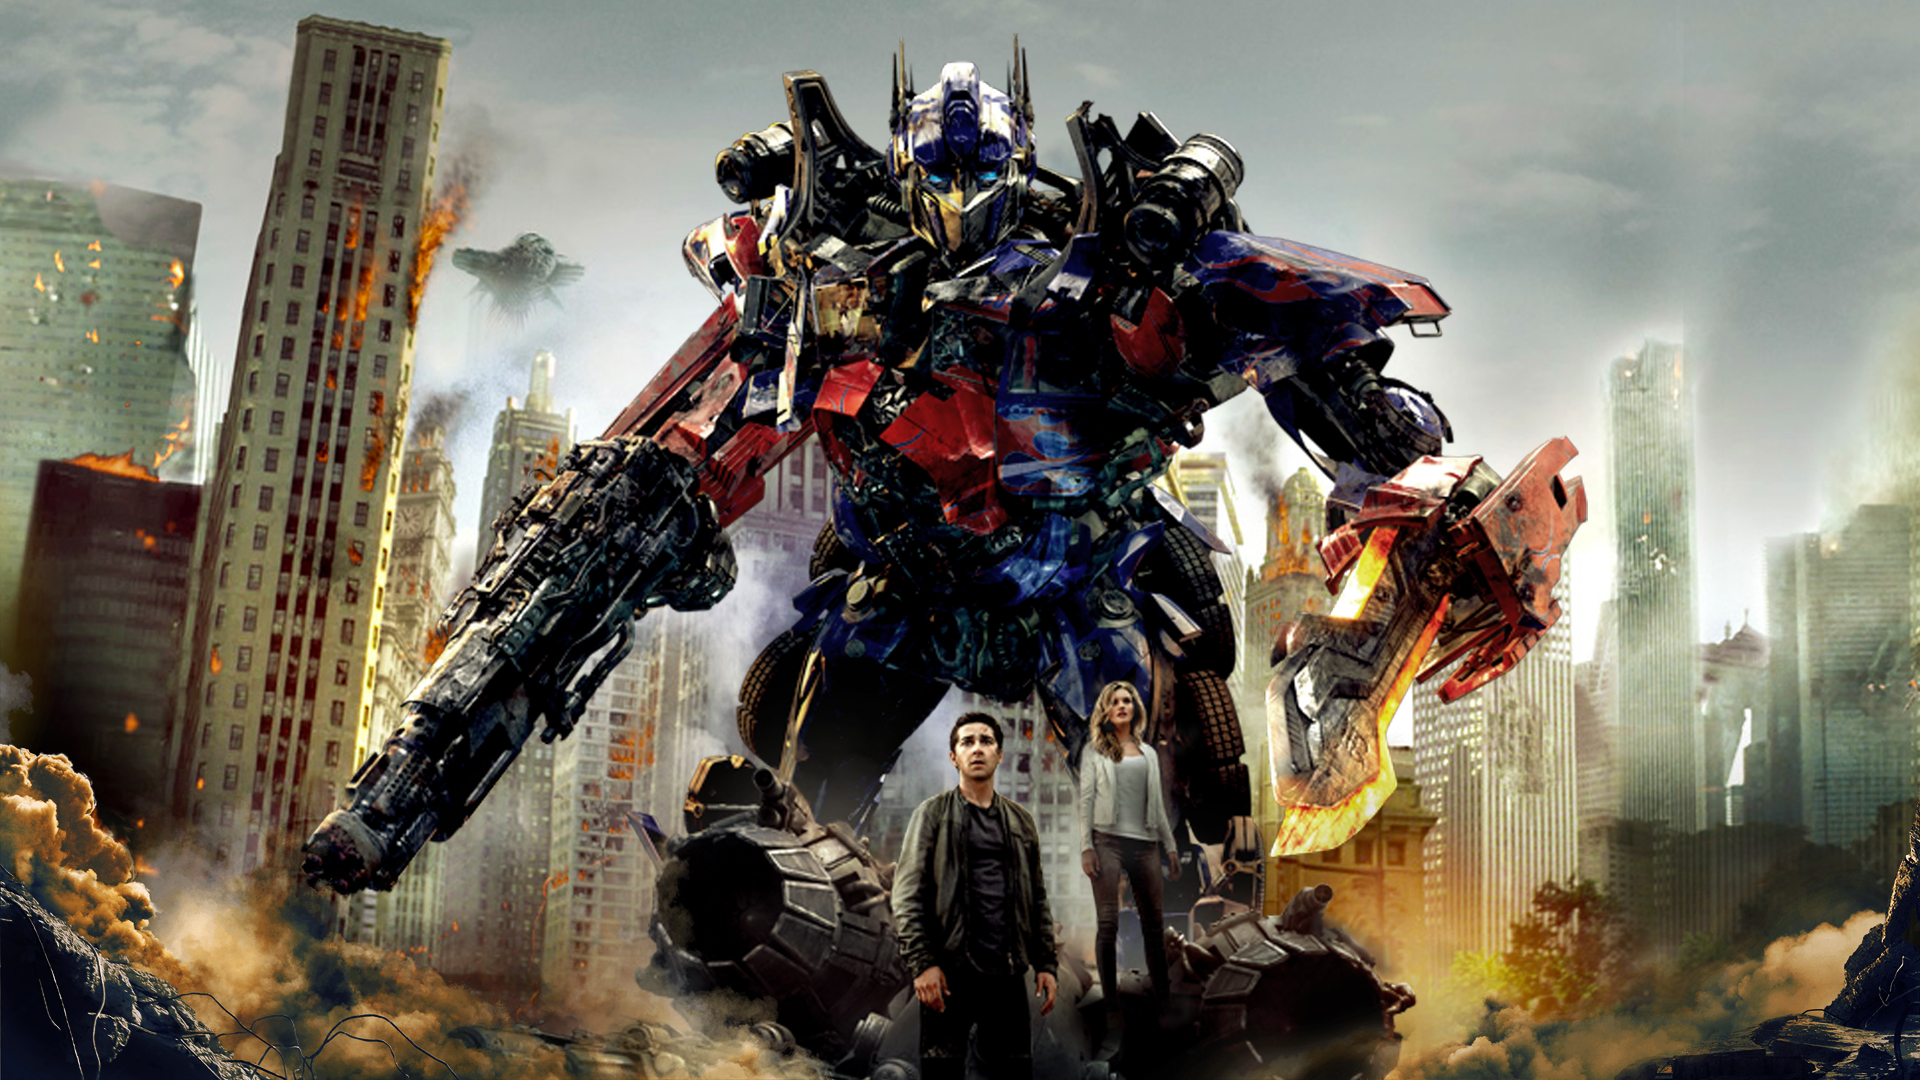 Download Optimus Prime Dark Of The Moon Wallpaper Images #xgnby